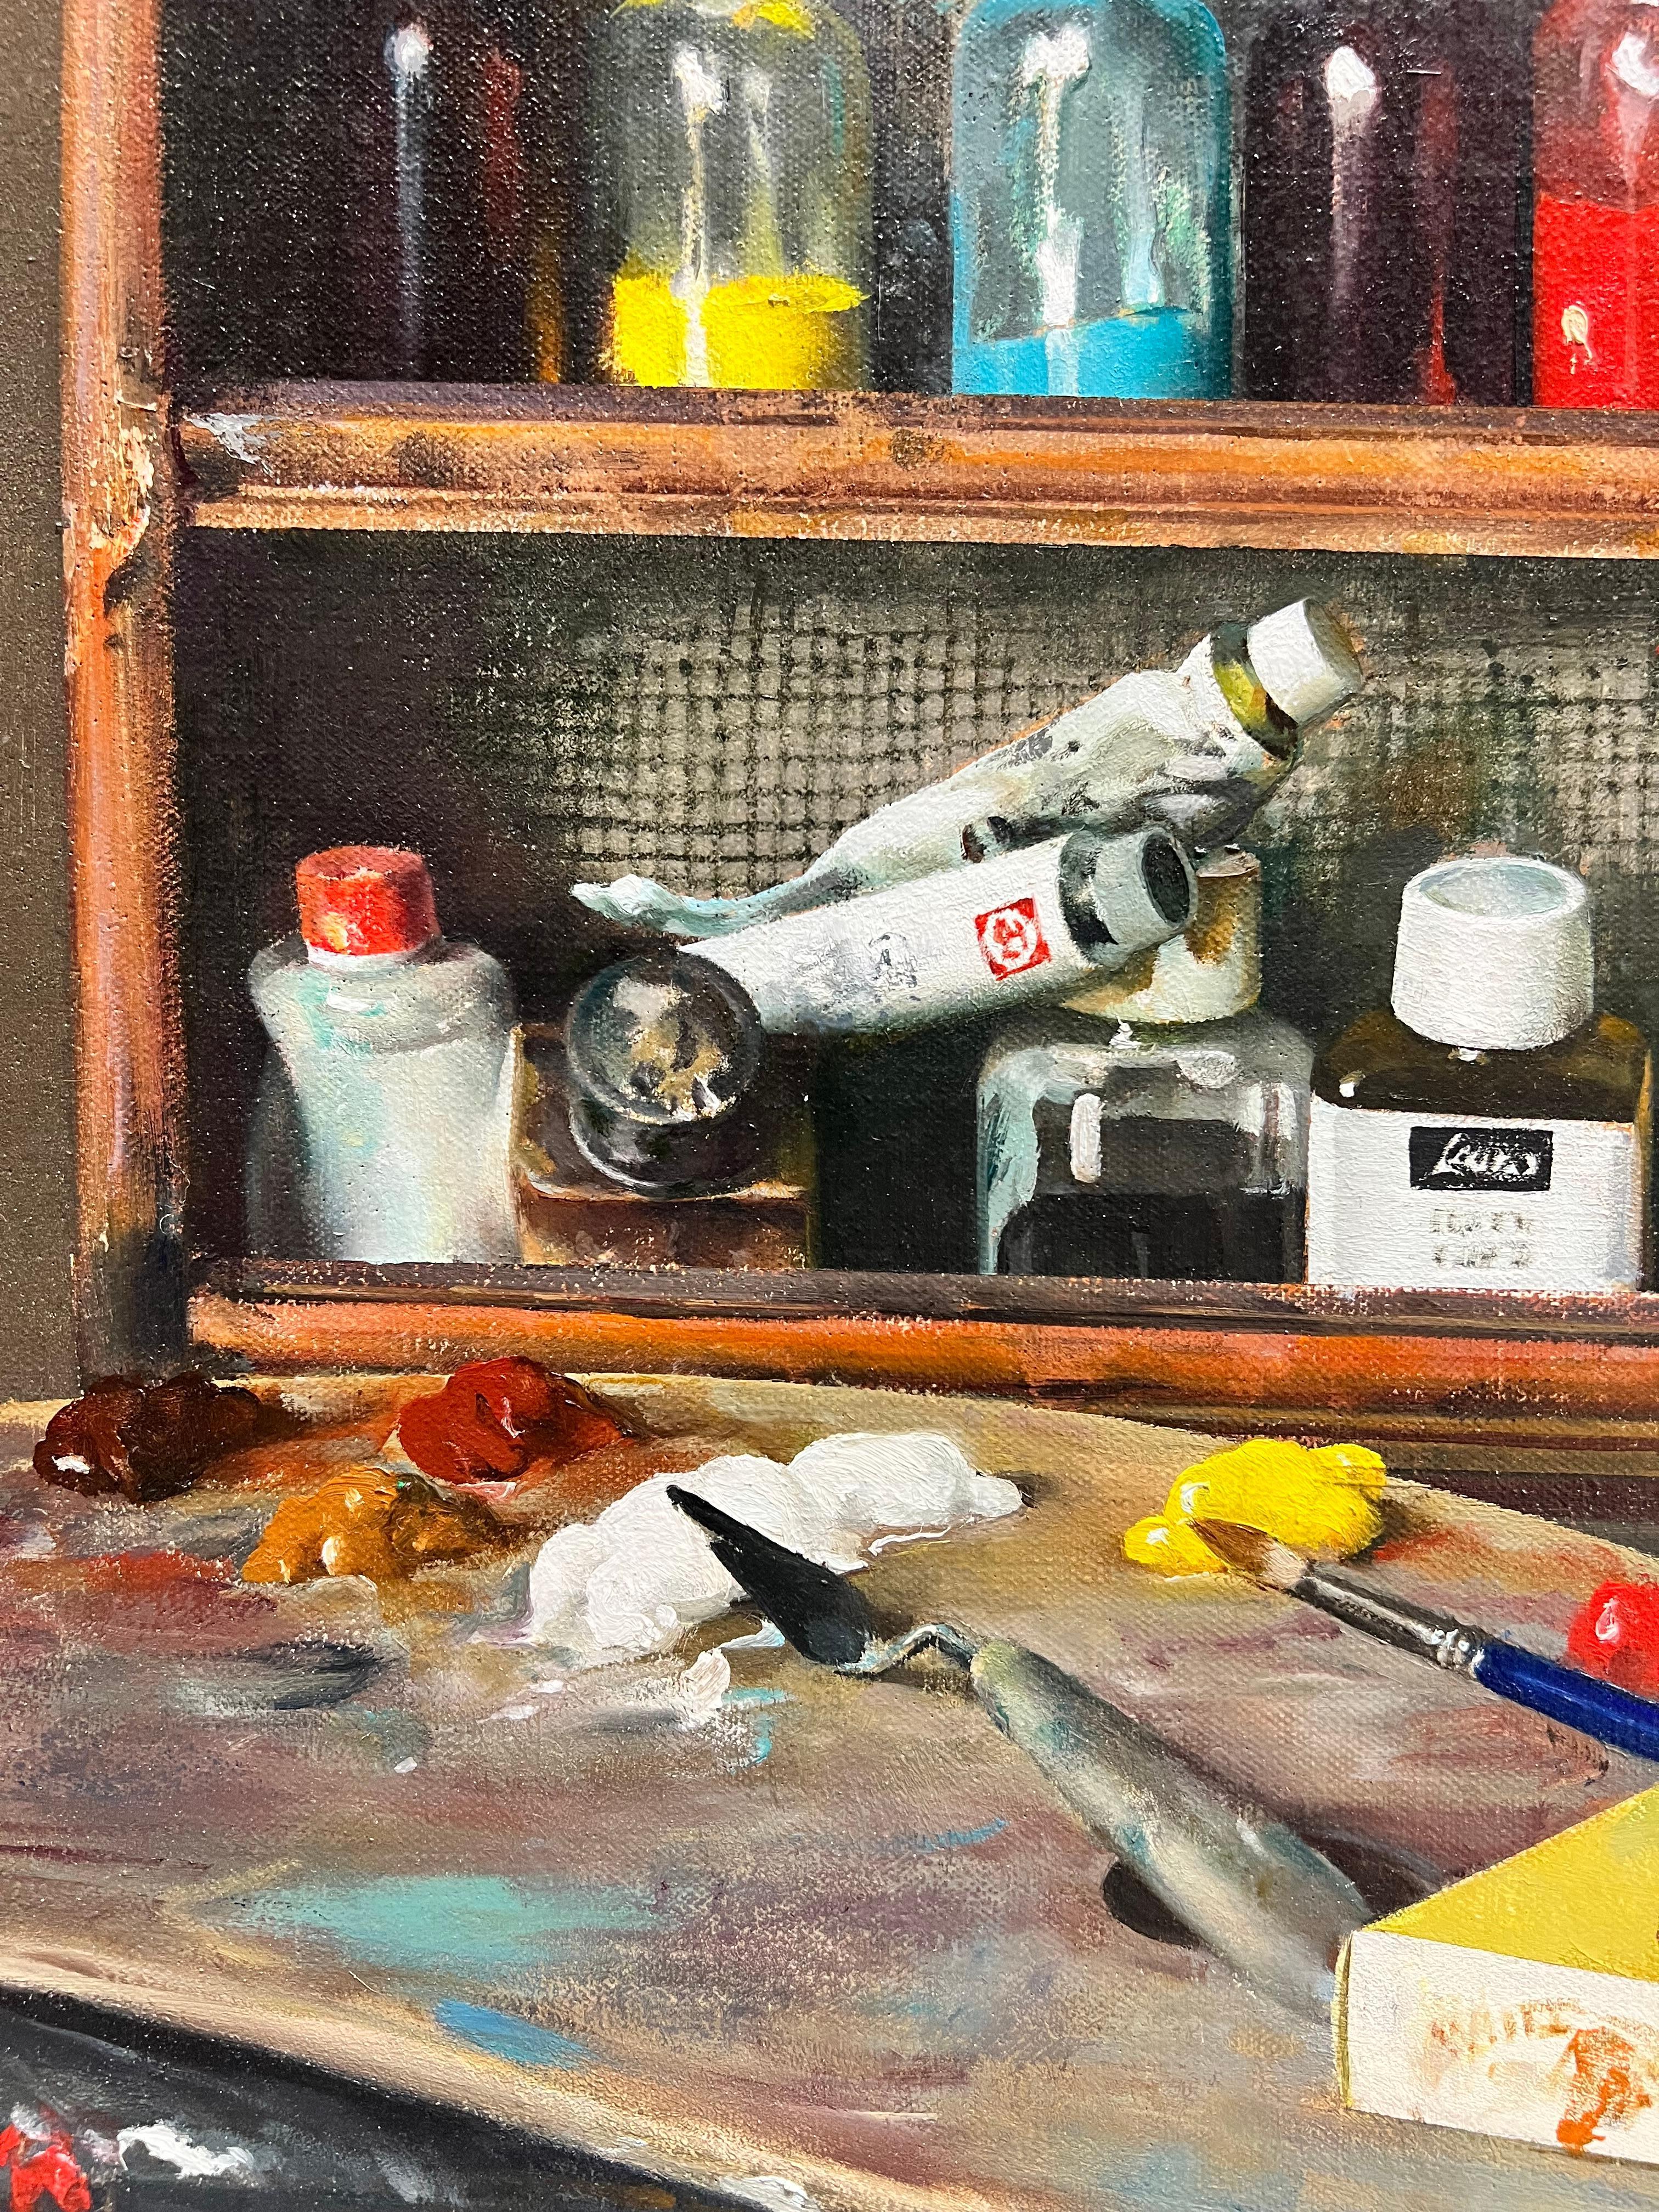 This painting beautifully captures a realistic view of an artist's studio.  The boxes covered in oil paint fingerprints, the small dent in the wall, the palette, tubes of paint scatter throughout- all come together to show the beauty in the mundane